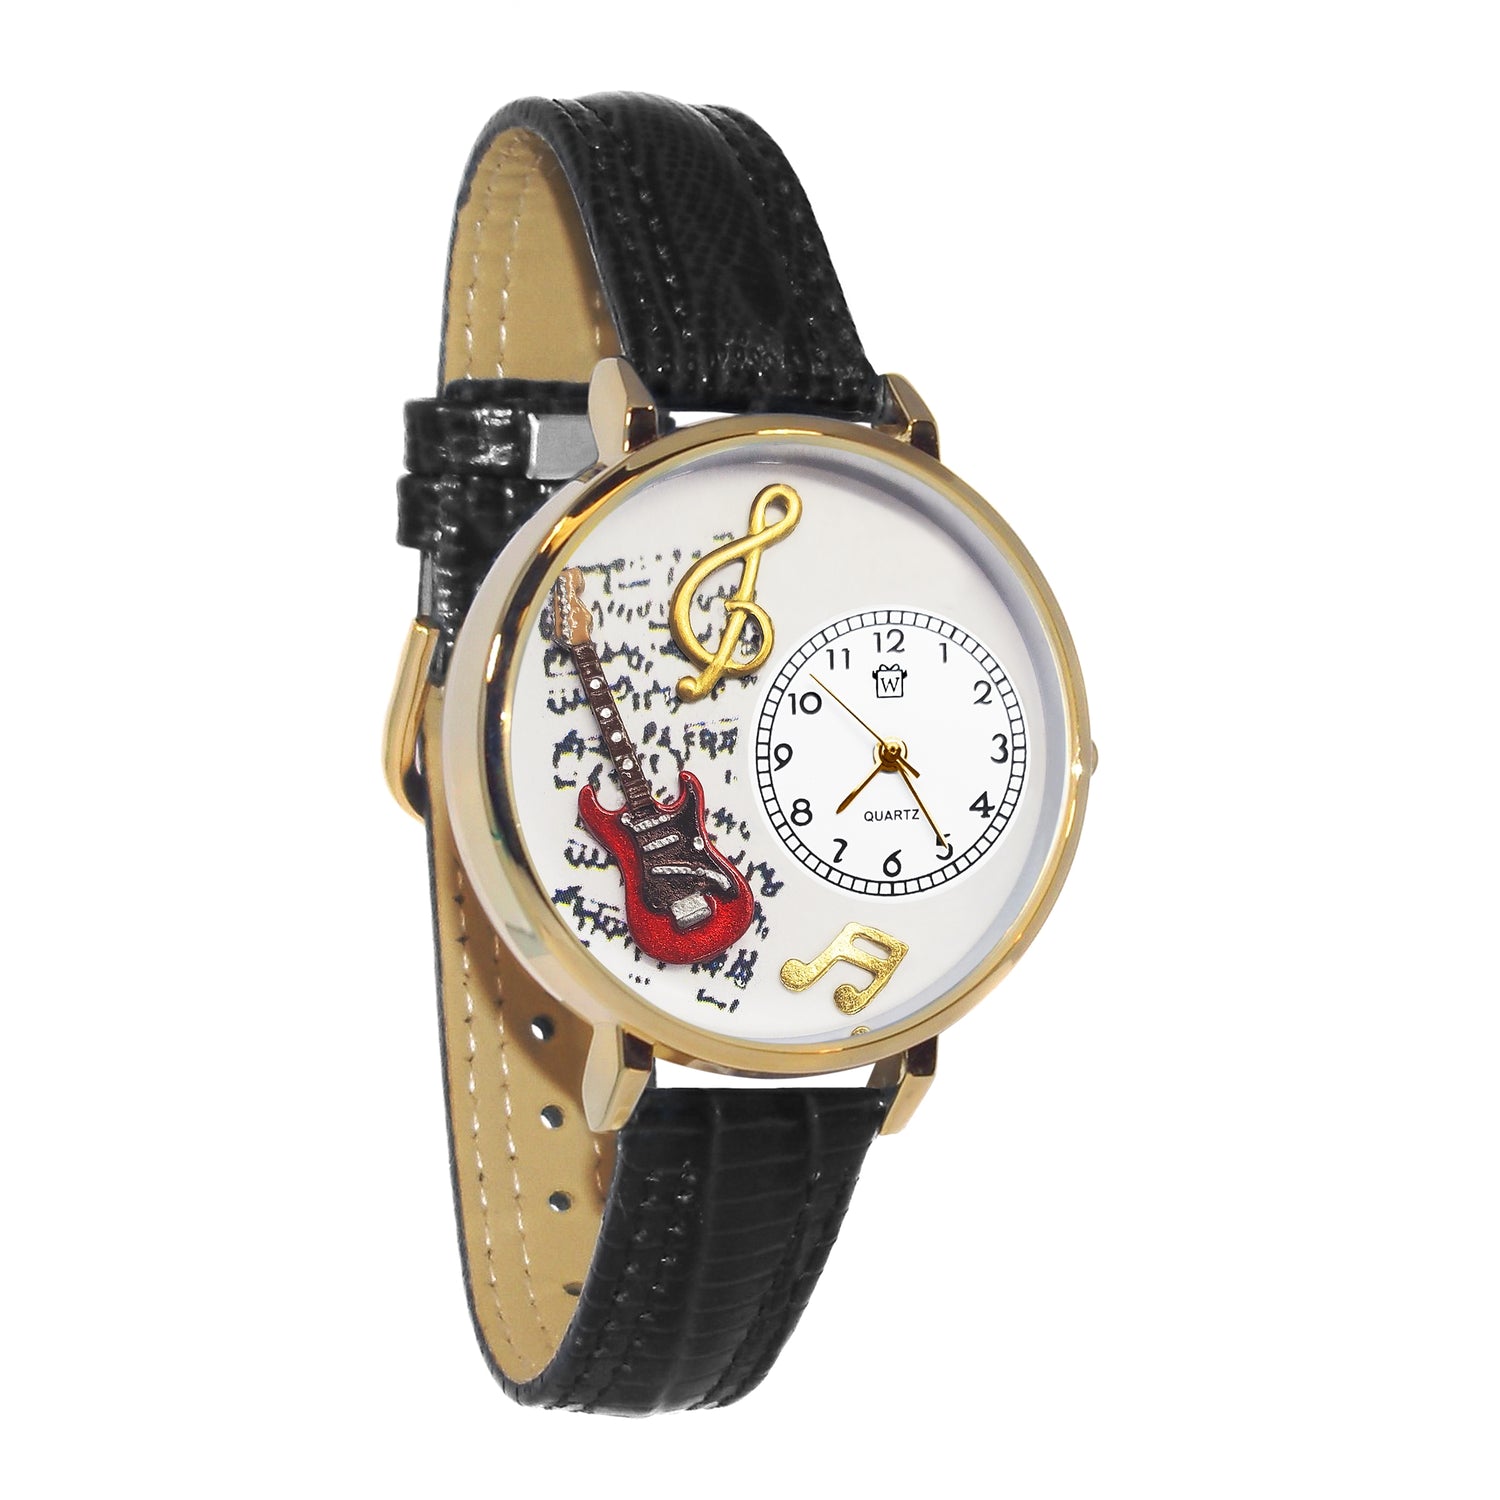 Whimsical Gifts | Electric Guitar 3D Watch Large Style | Handmade in USA | Hobbies & Special Interests | Music | Novelty Unique Fun Miniatures Gift | Gold Finish Black Leather Watch Band